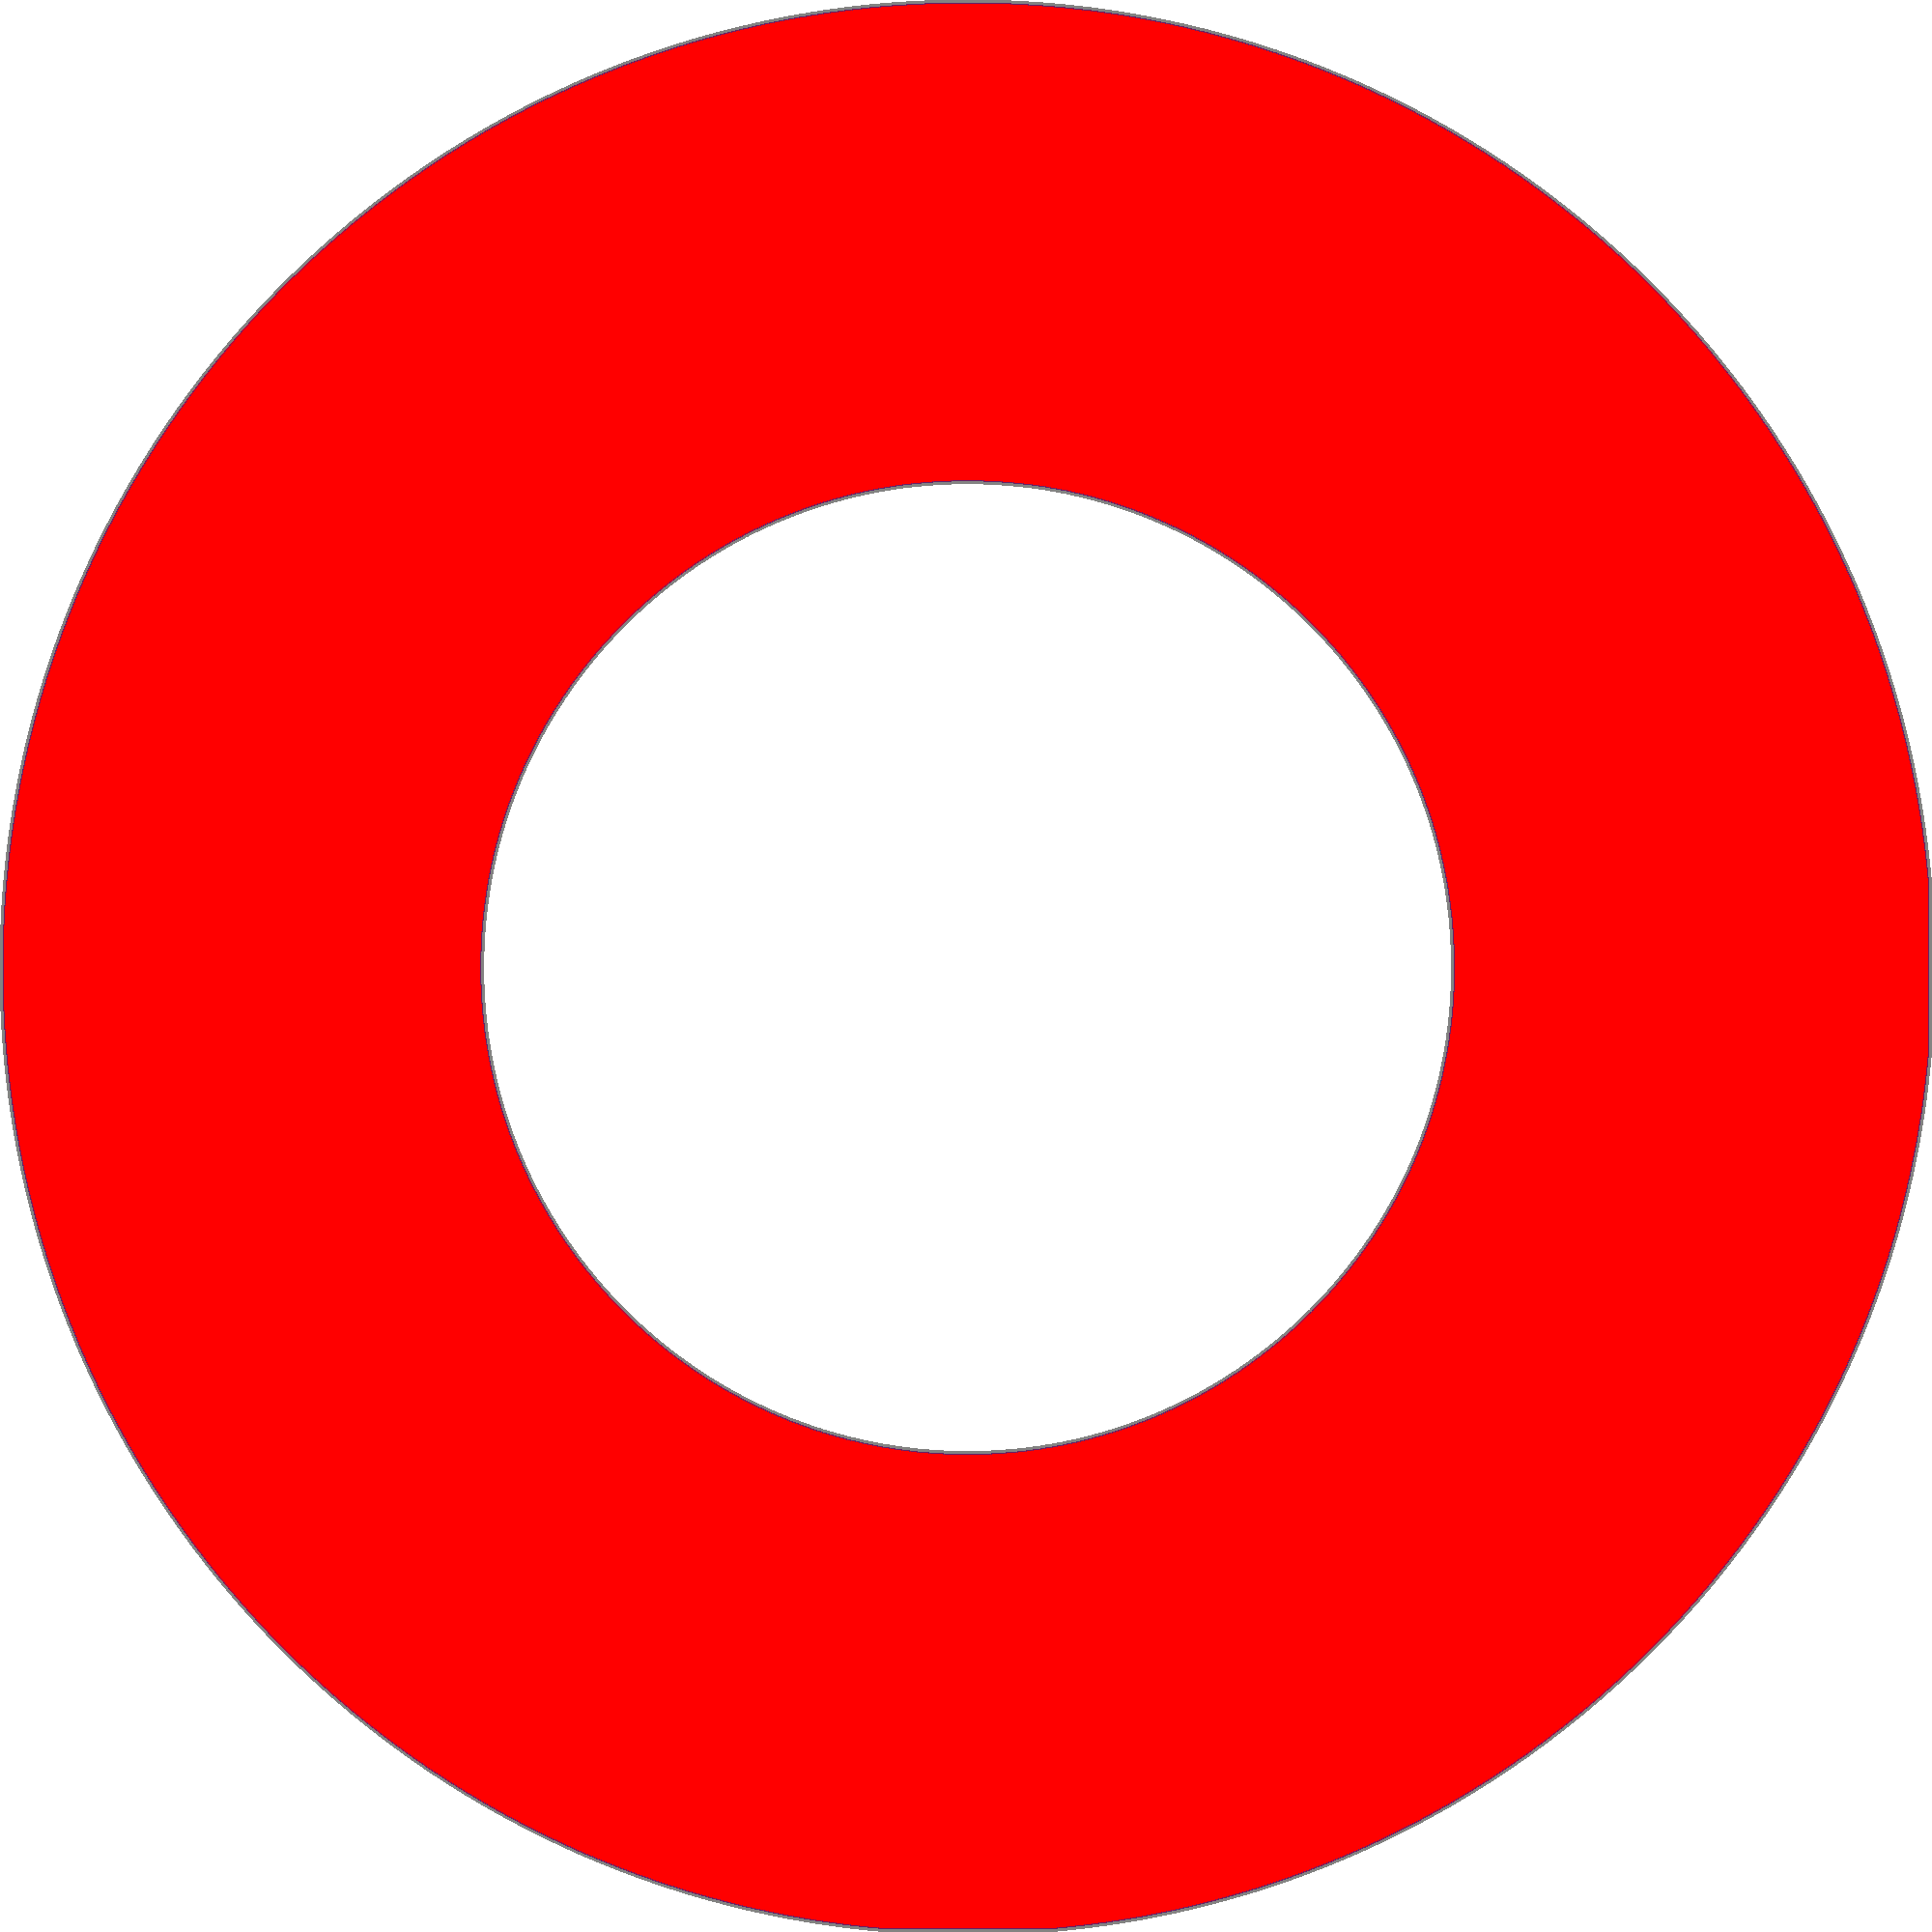 A Red Circle With Black Center